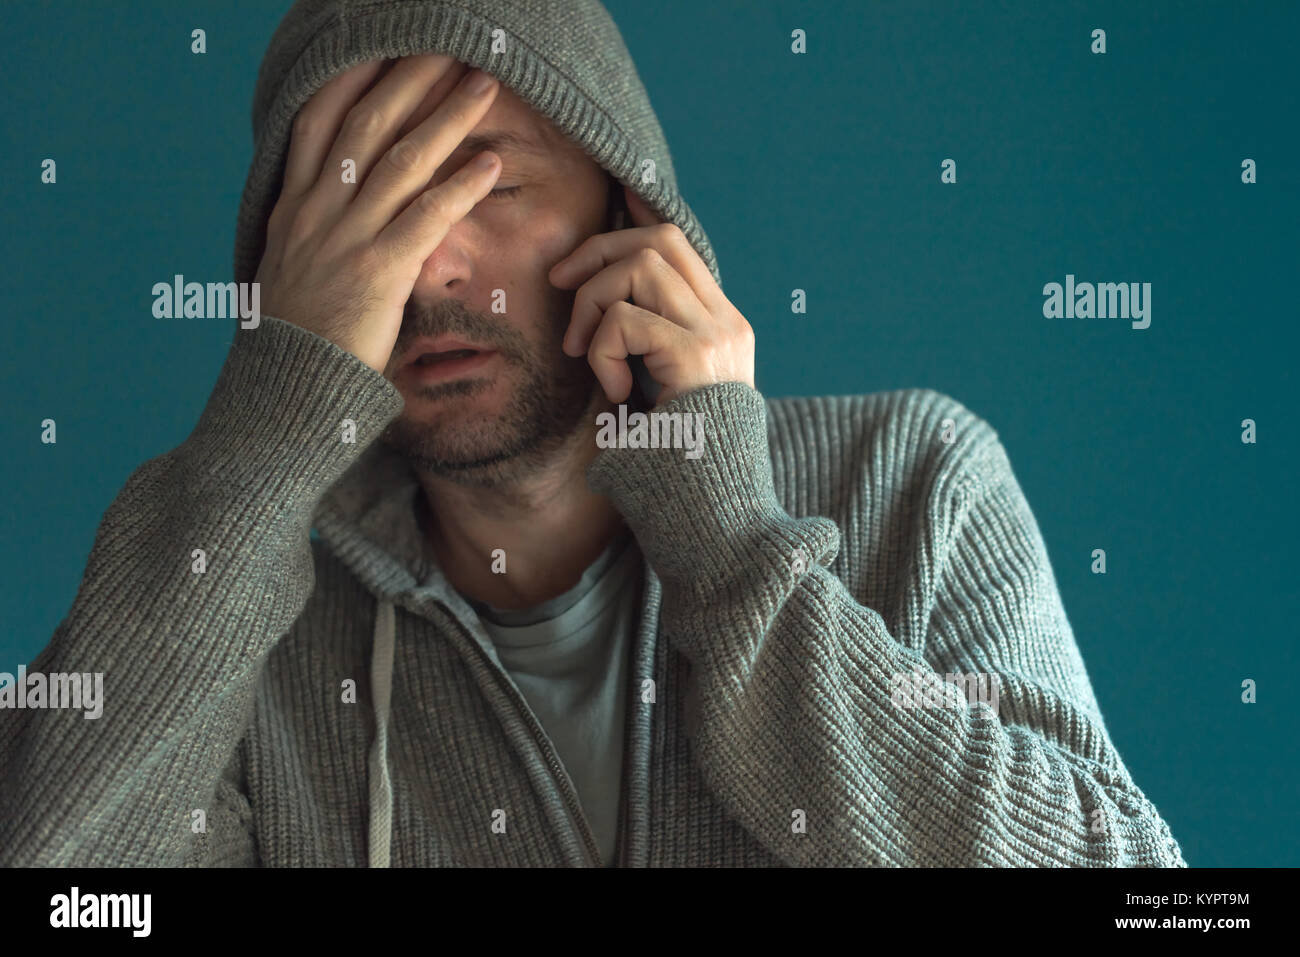 Face palm and mobile phone, man with hooded jacket covering face in disbelief while communicating over smartphone Stock Photo